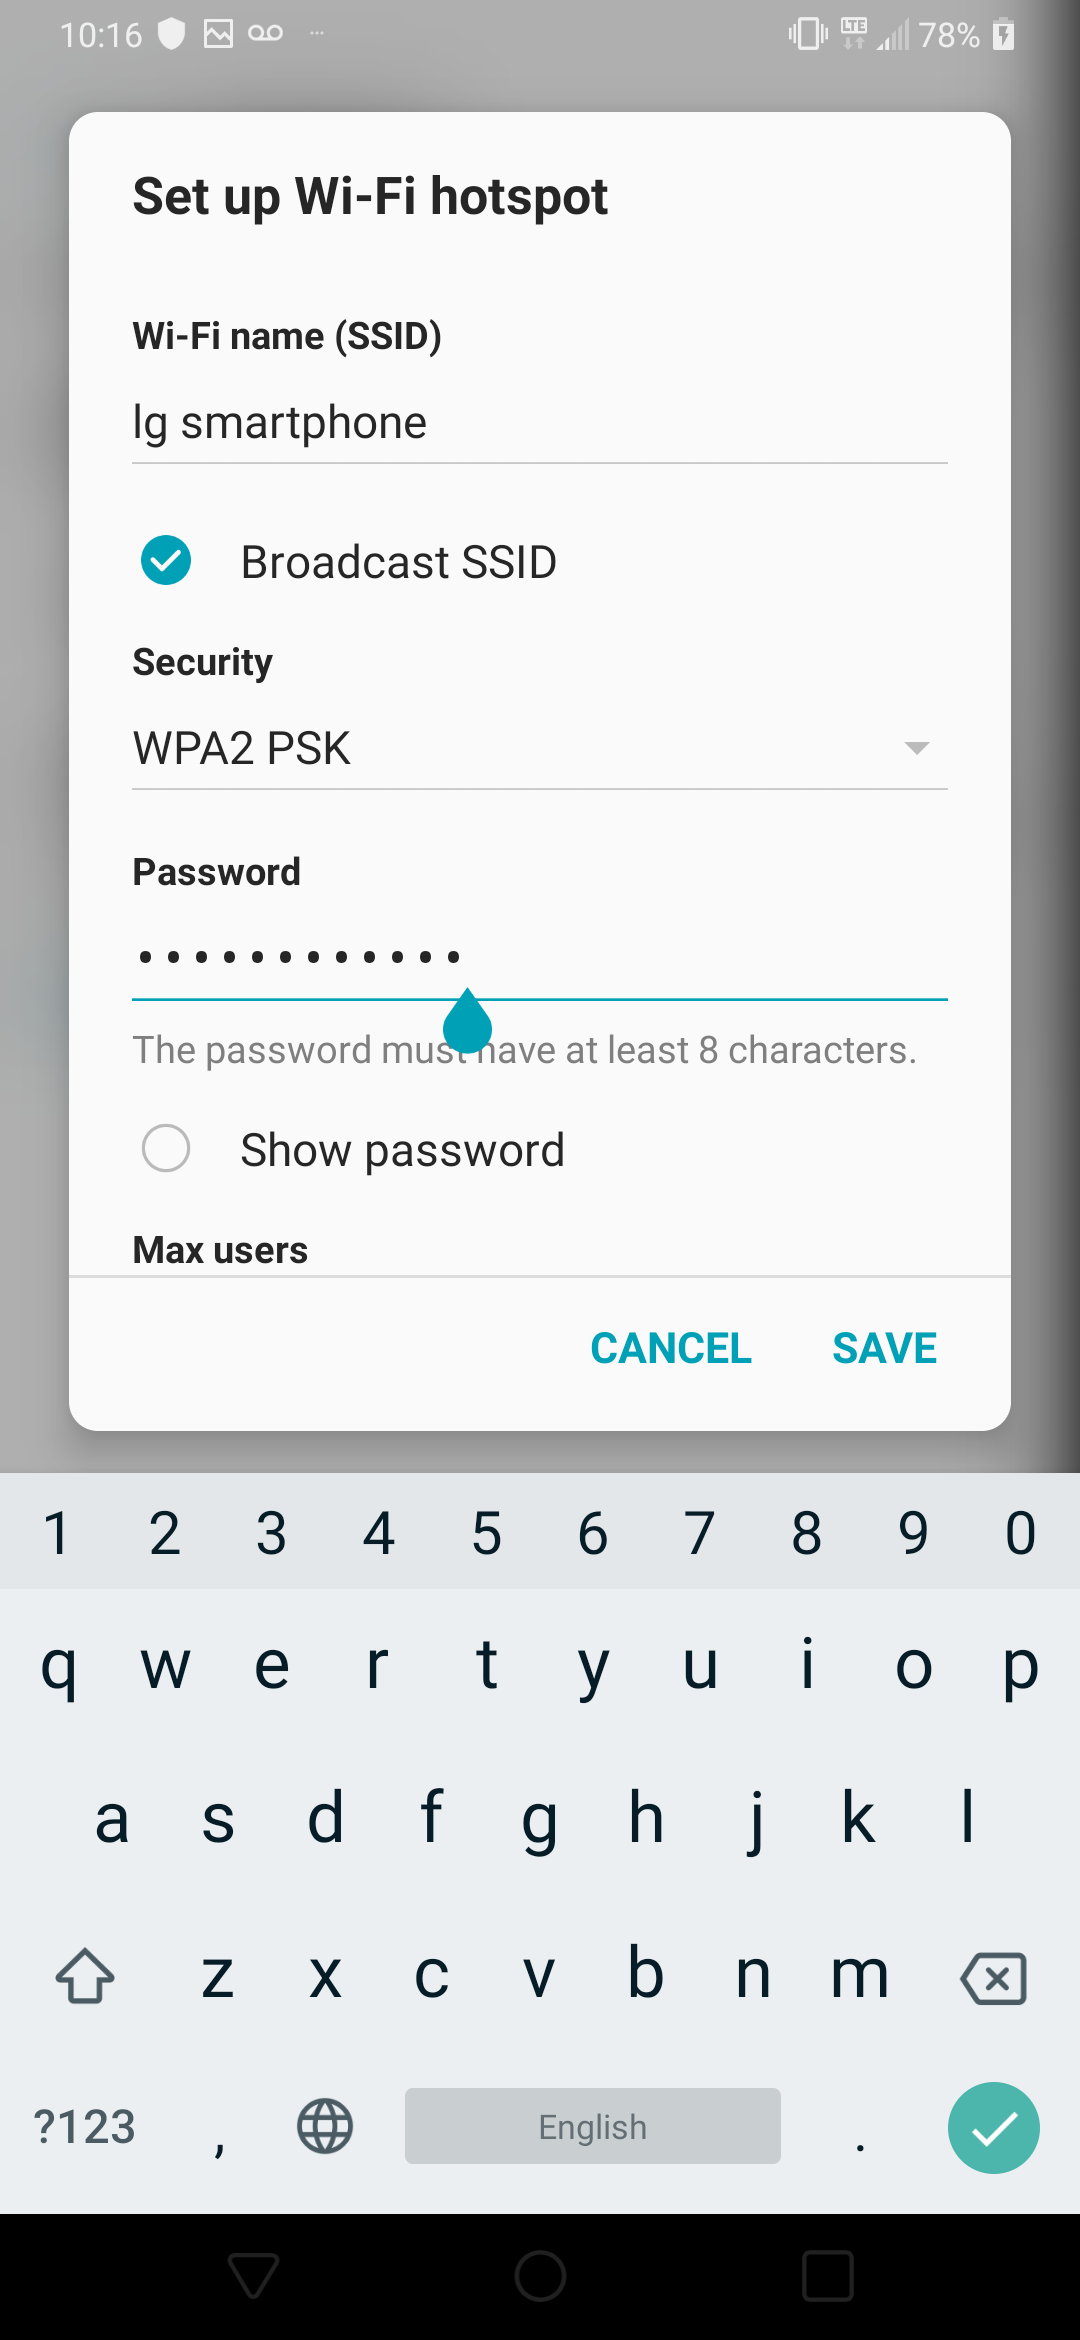 To change the network password, delete the existing password and enter a new one.